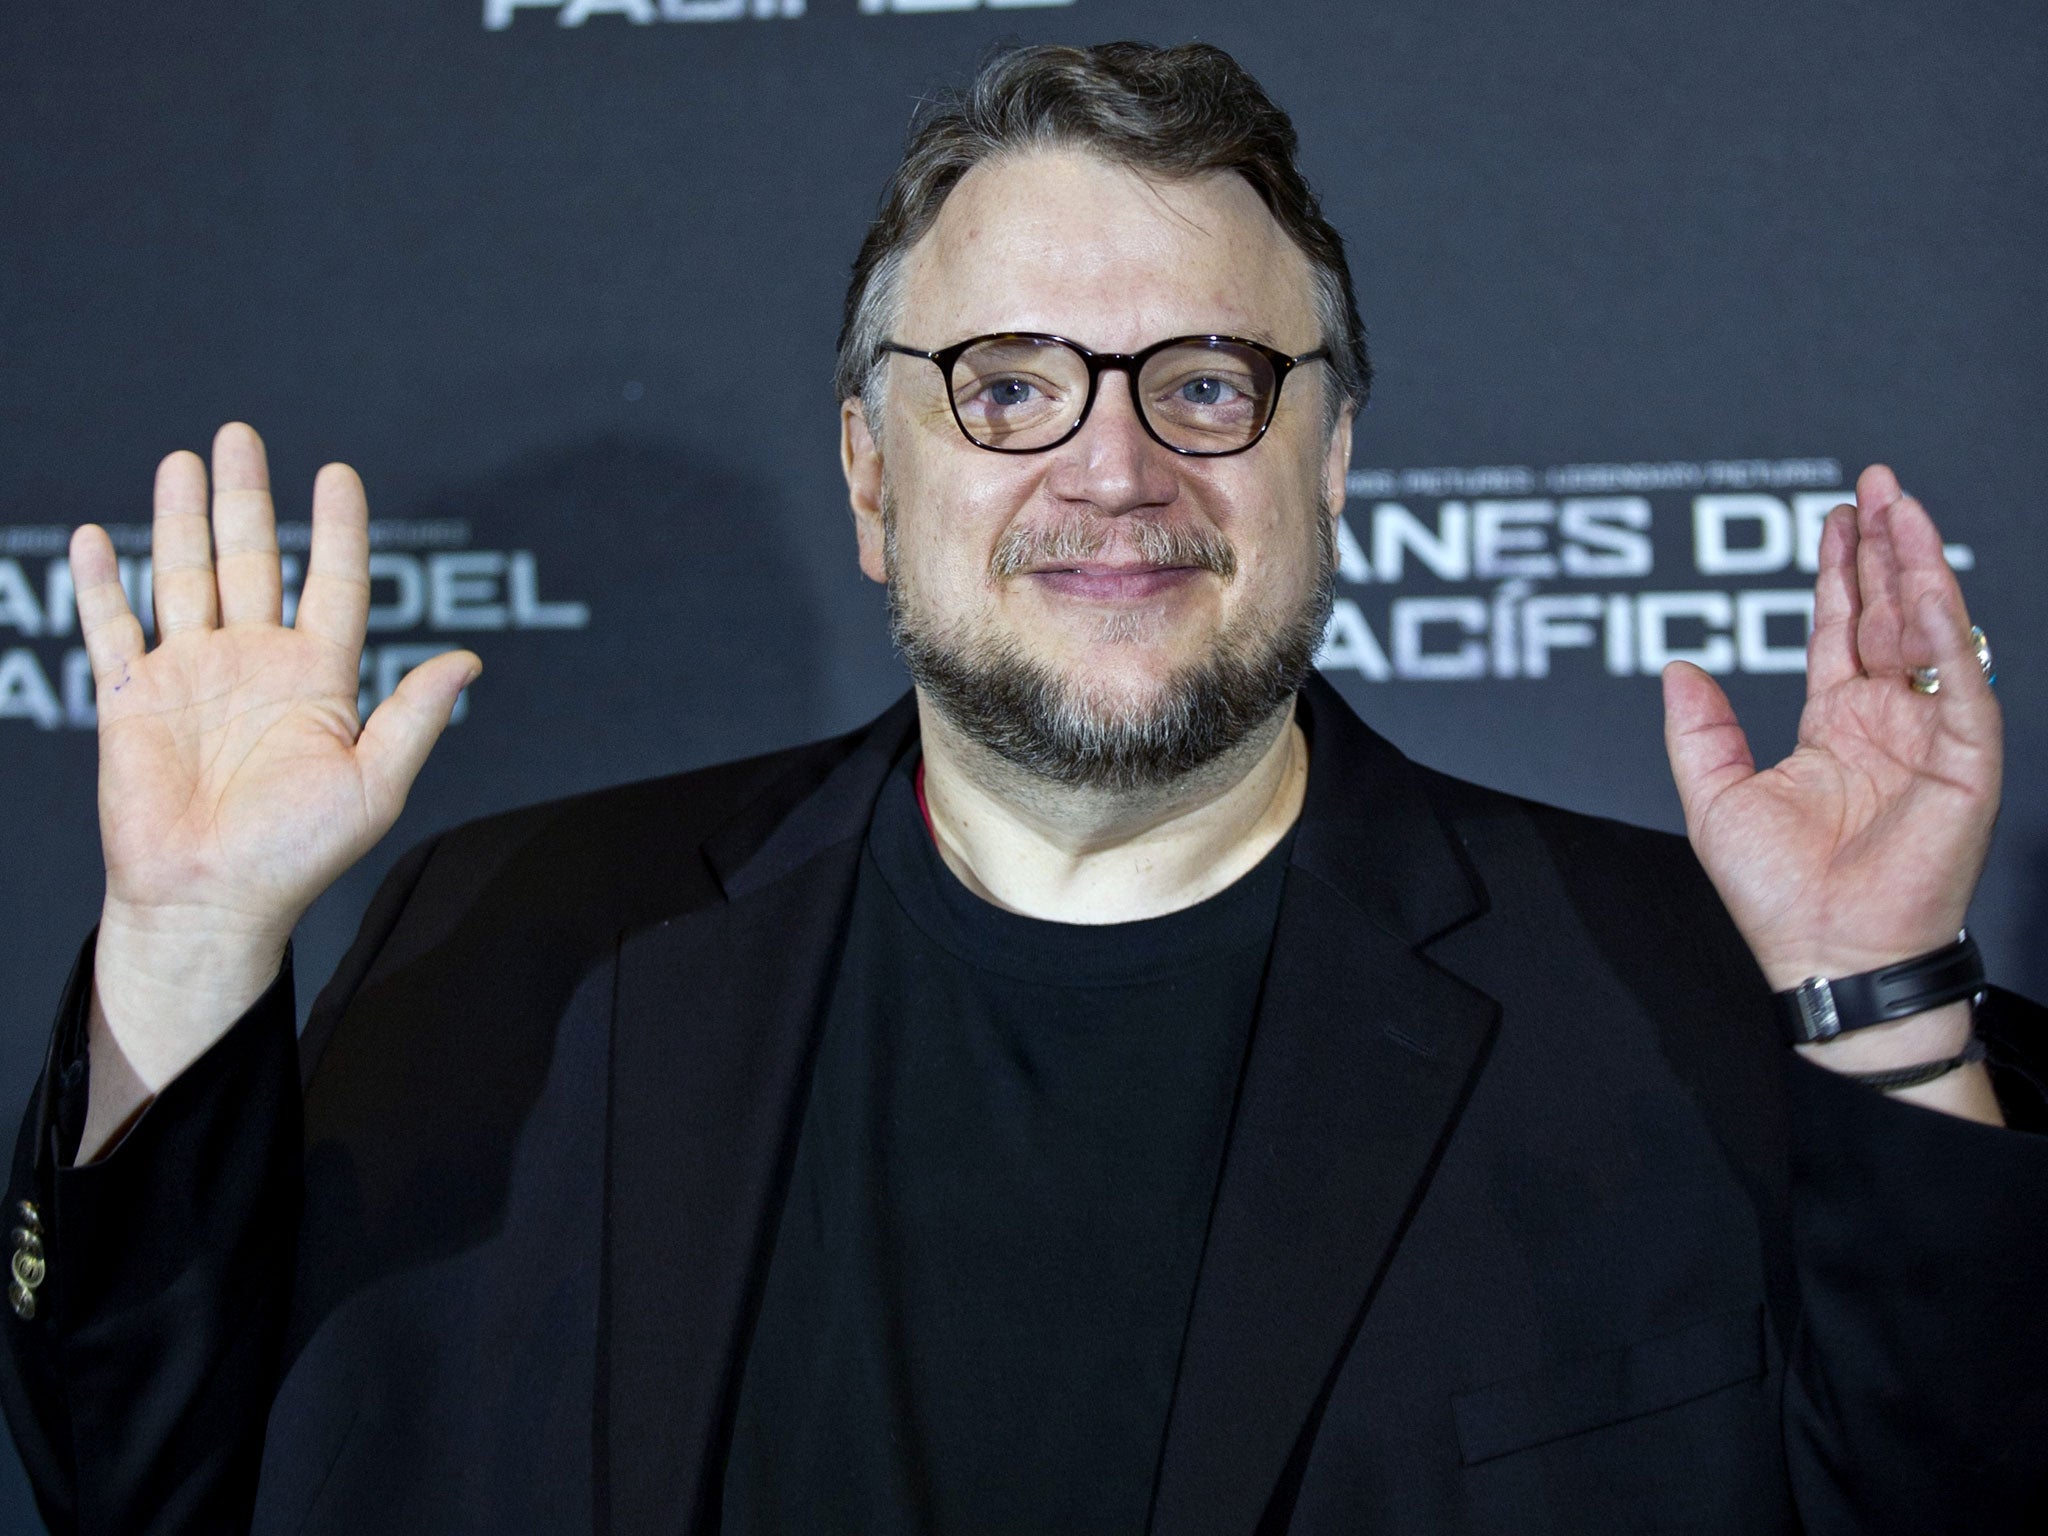 'He's the don': The Pacific Rim cast have high praise for Guillermo del Toro